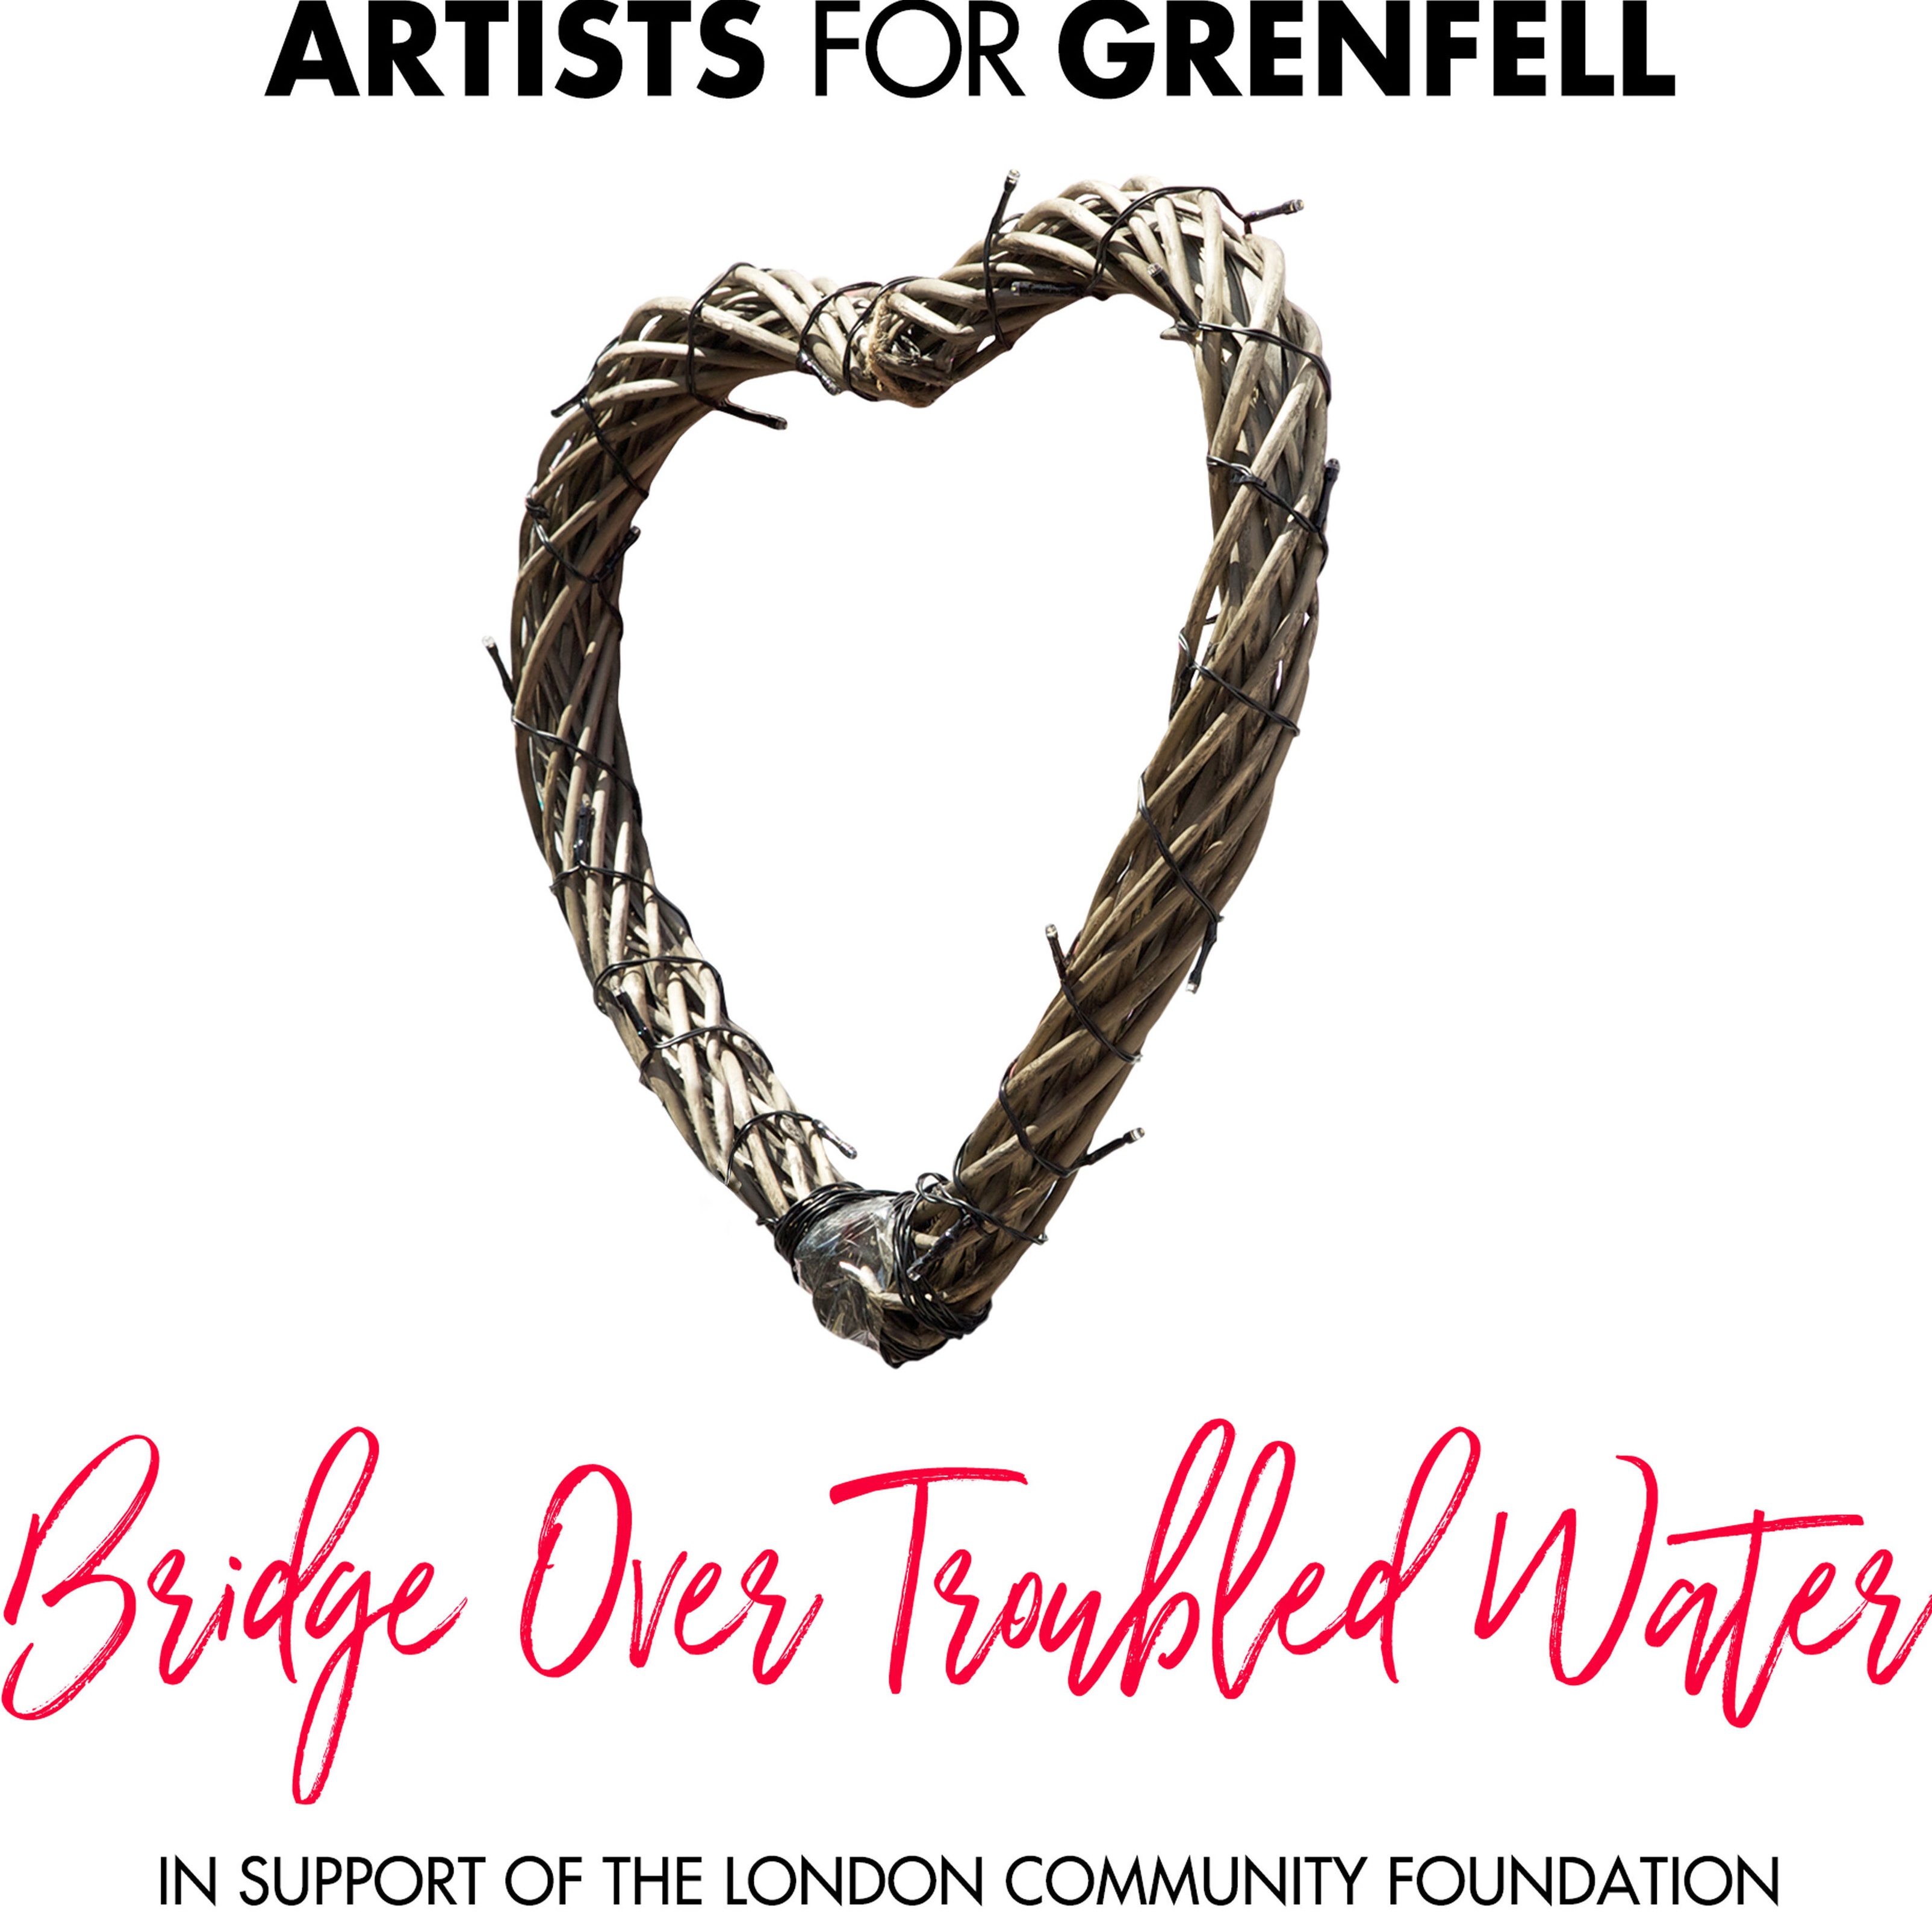 The artwork for Simon Cowell’s charity single